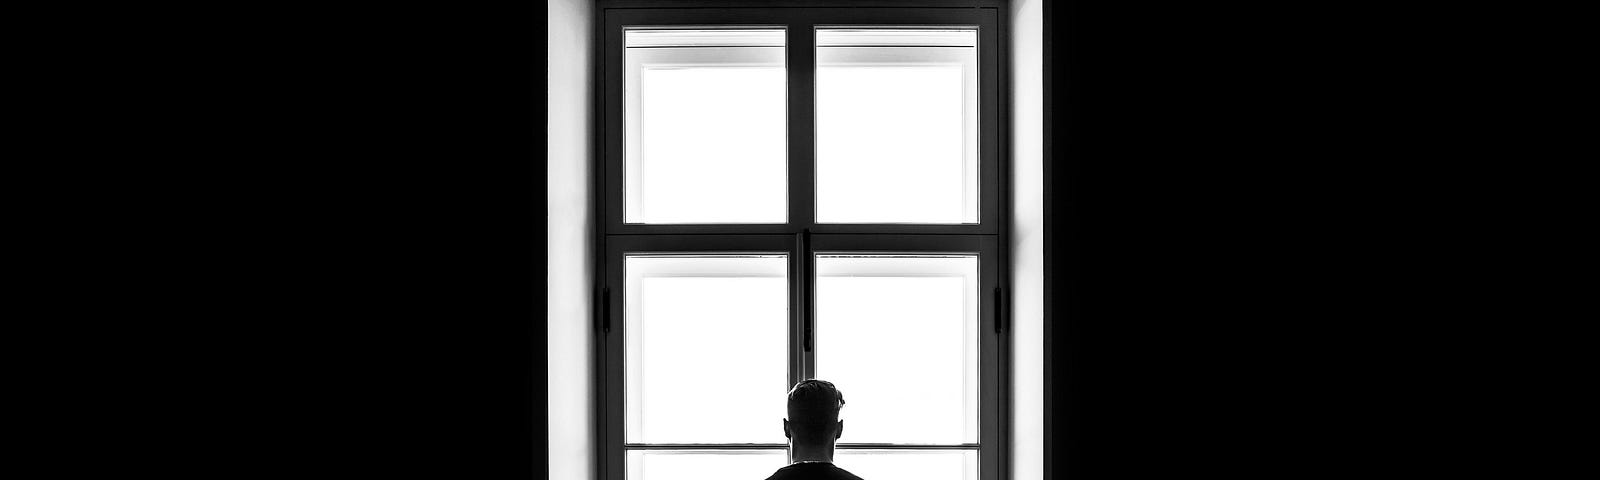 Man standing at a window, staring straight ahead.